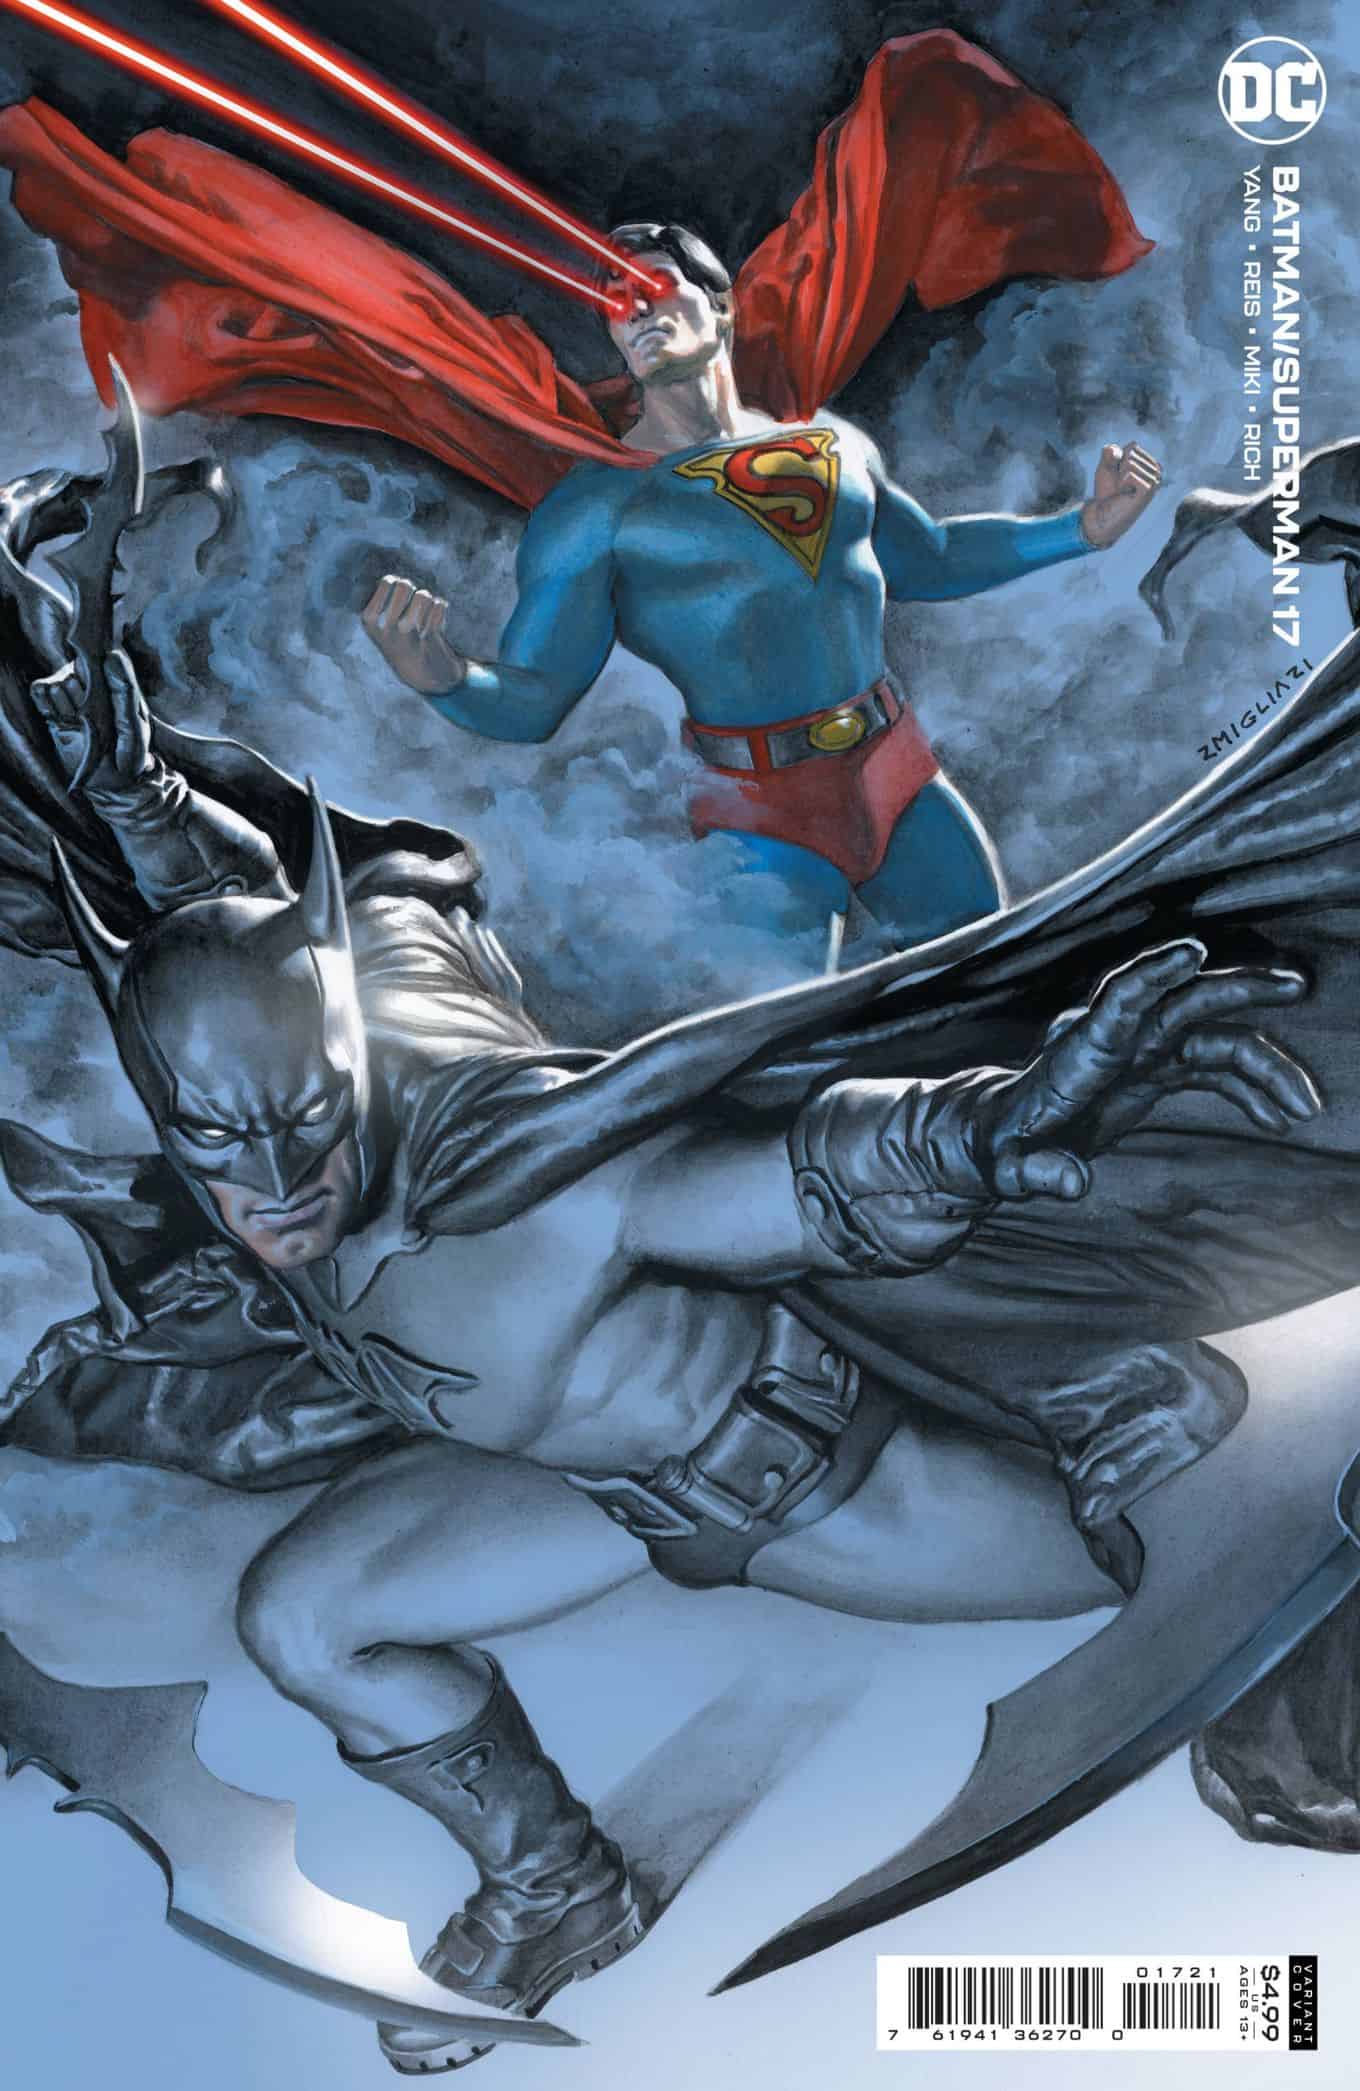 DC Comics & Batman / Superman #17 Spoilers & Review: Architect Of Worlds  Traps Superman In 1940's Radio Serial Where Batman, Robin & Joker Are NOT  What They Seem! – Inside Pulse